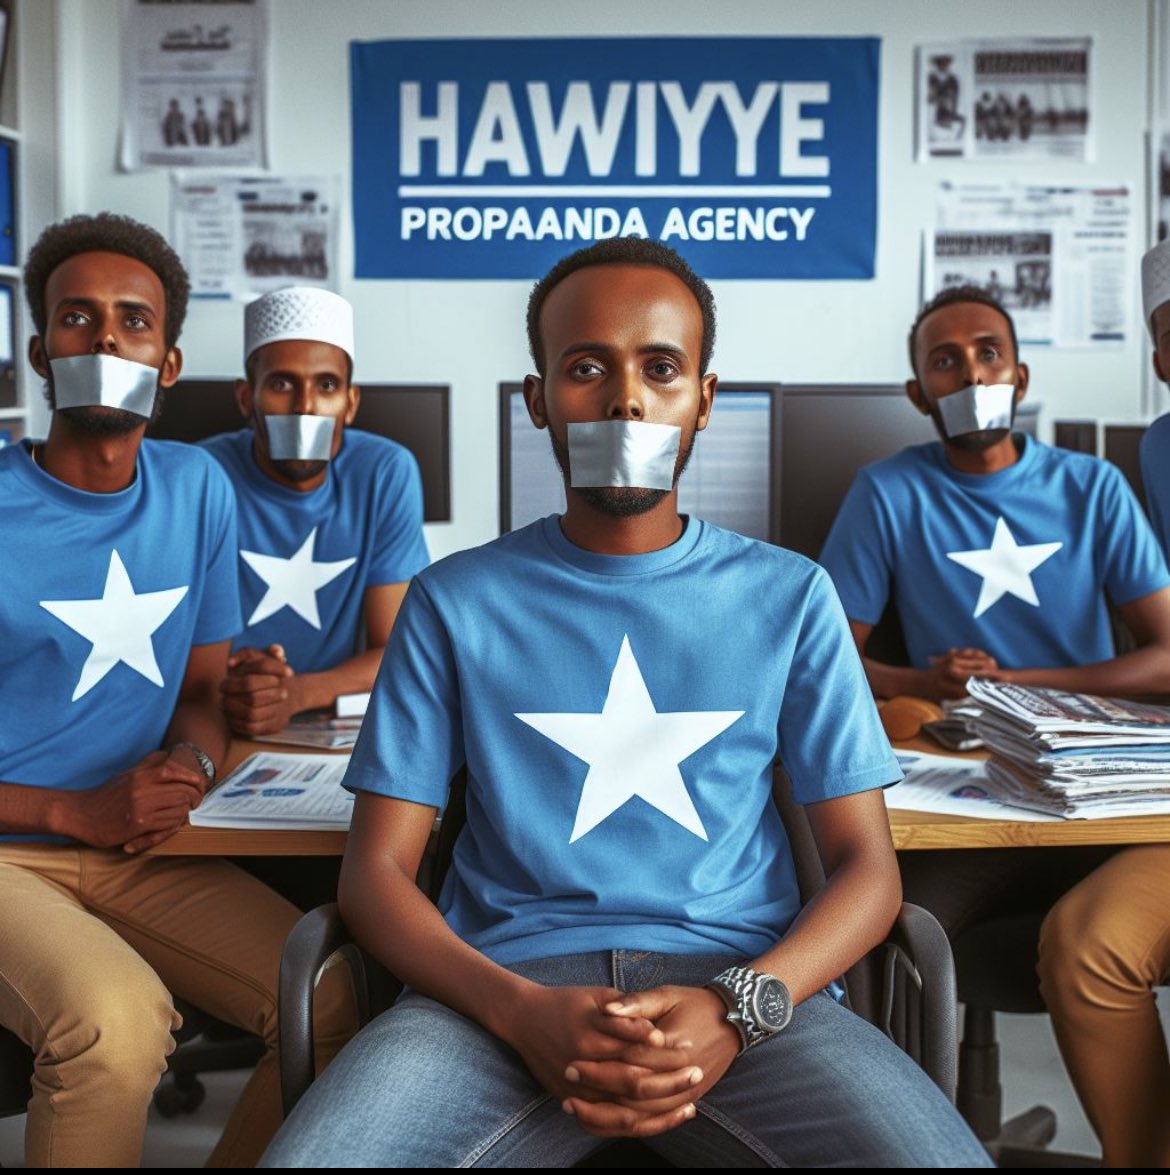 Majeertenia put tape on the mouth of the Hawiye propaganda agency, and now they've disappeared. 

- Where is the #NotanInch? 
- The annexation narrative & ilmo yaxaas? 
- The Somali diid & lefti naga propaganda? 

Looks like @HassanSMohamud gave them the day off 😂